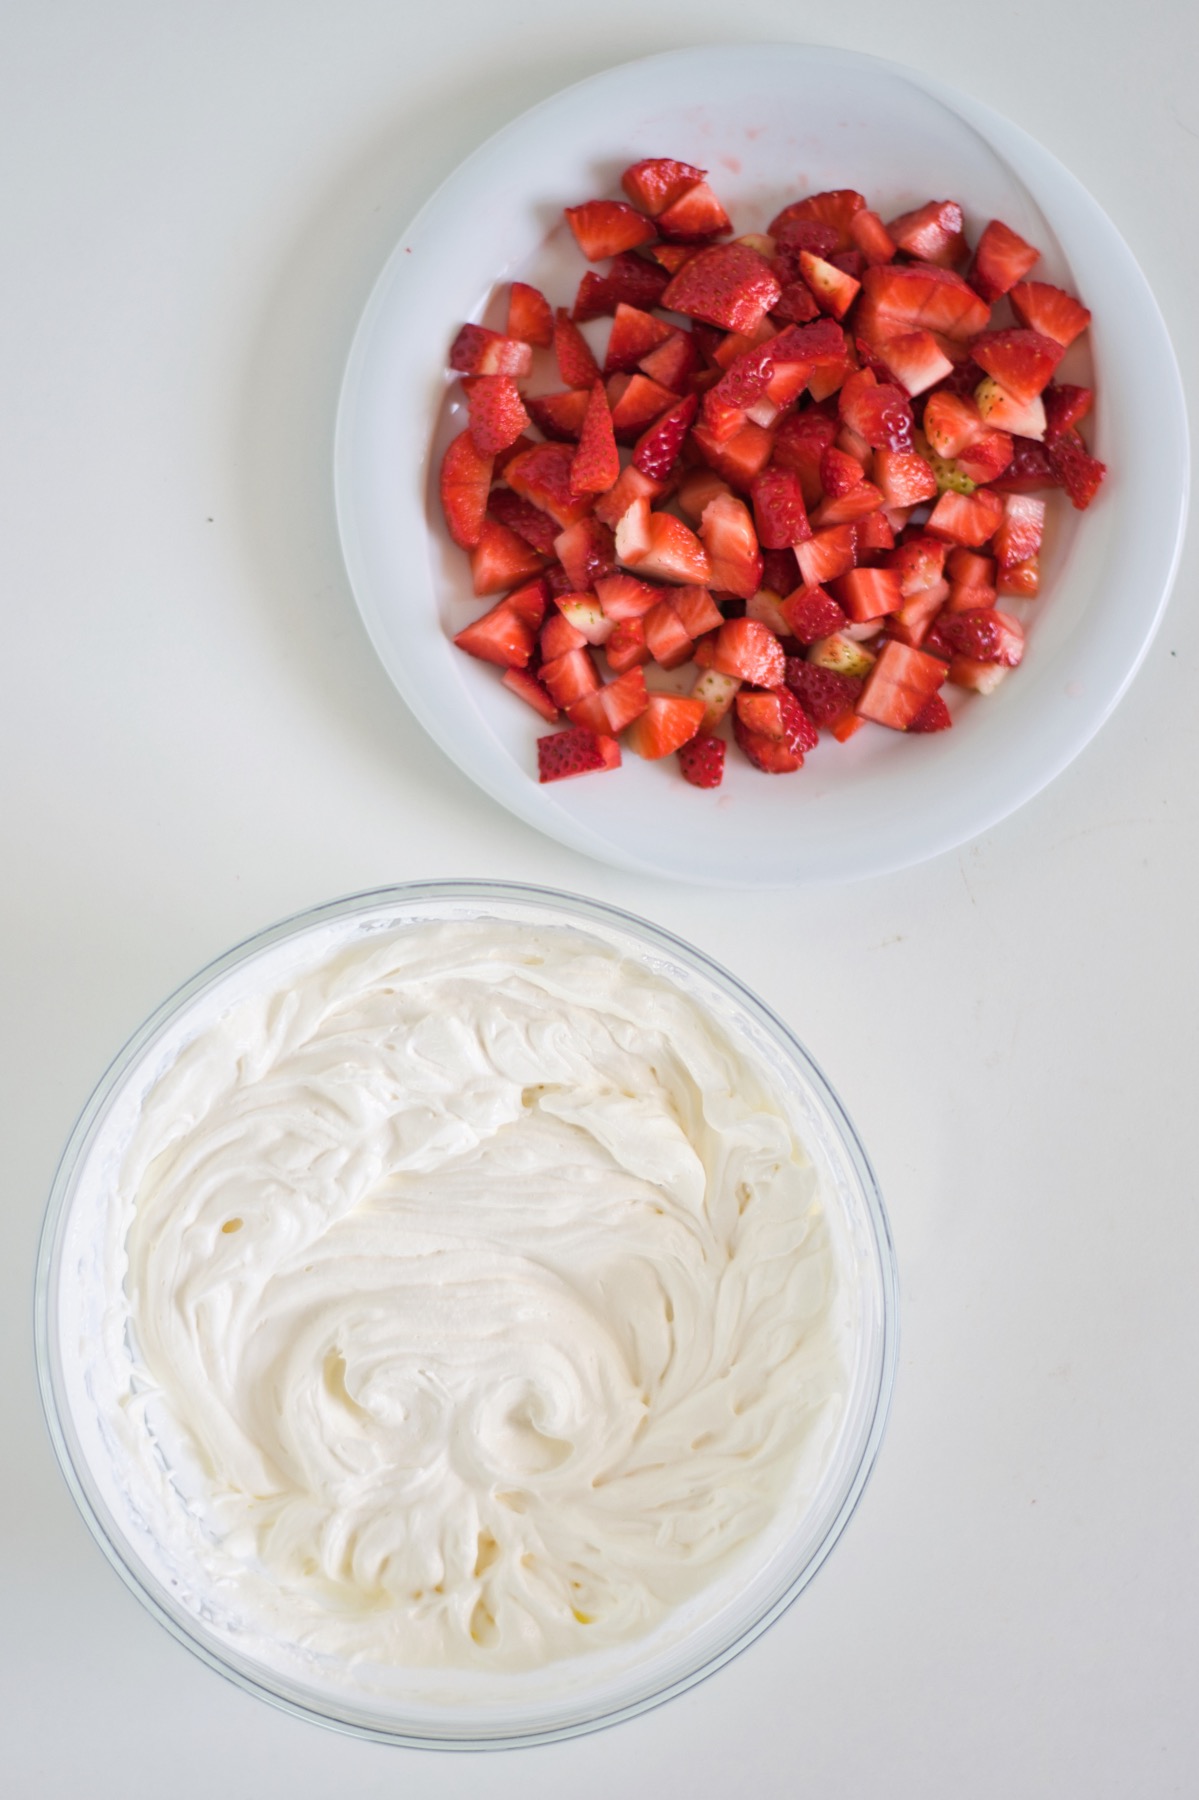 whip the cream and mix with the strawberries